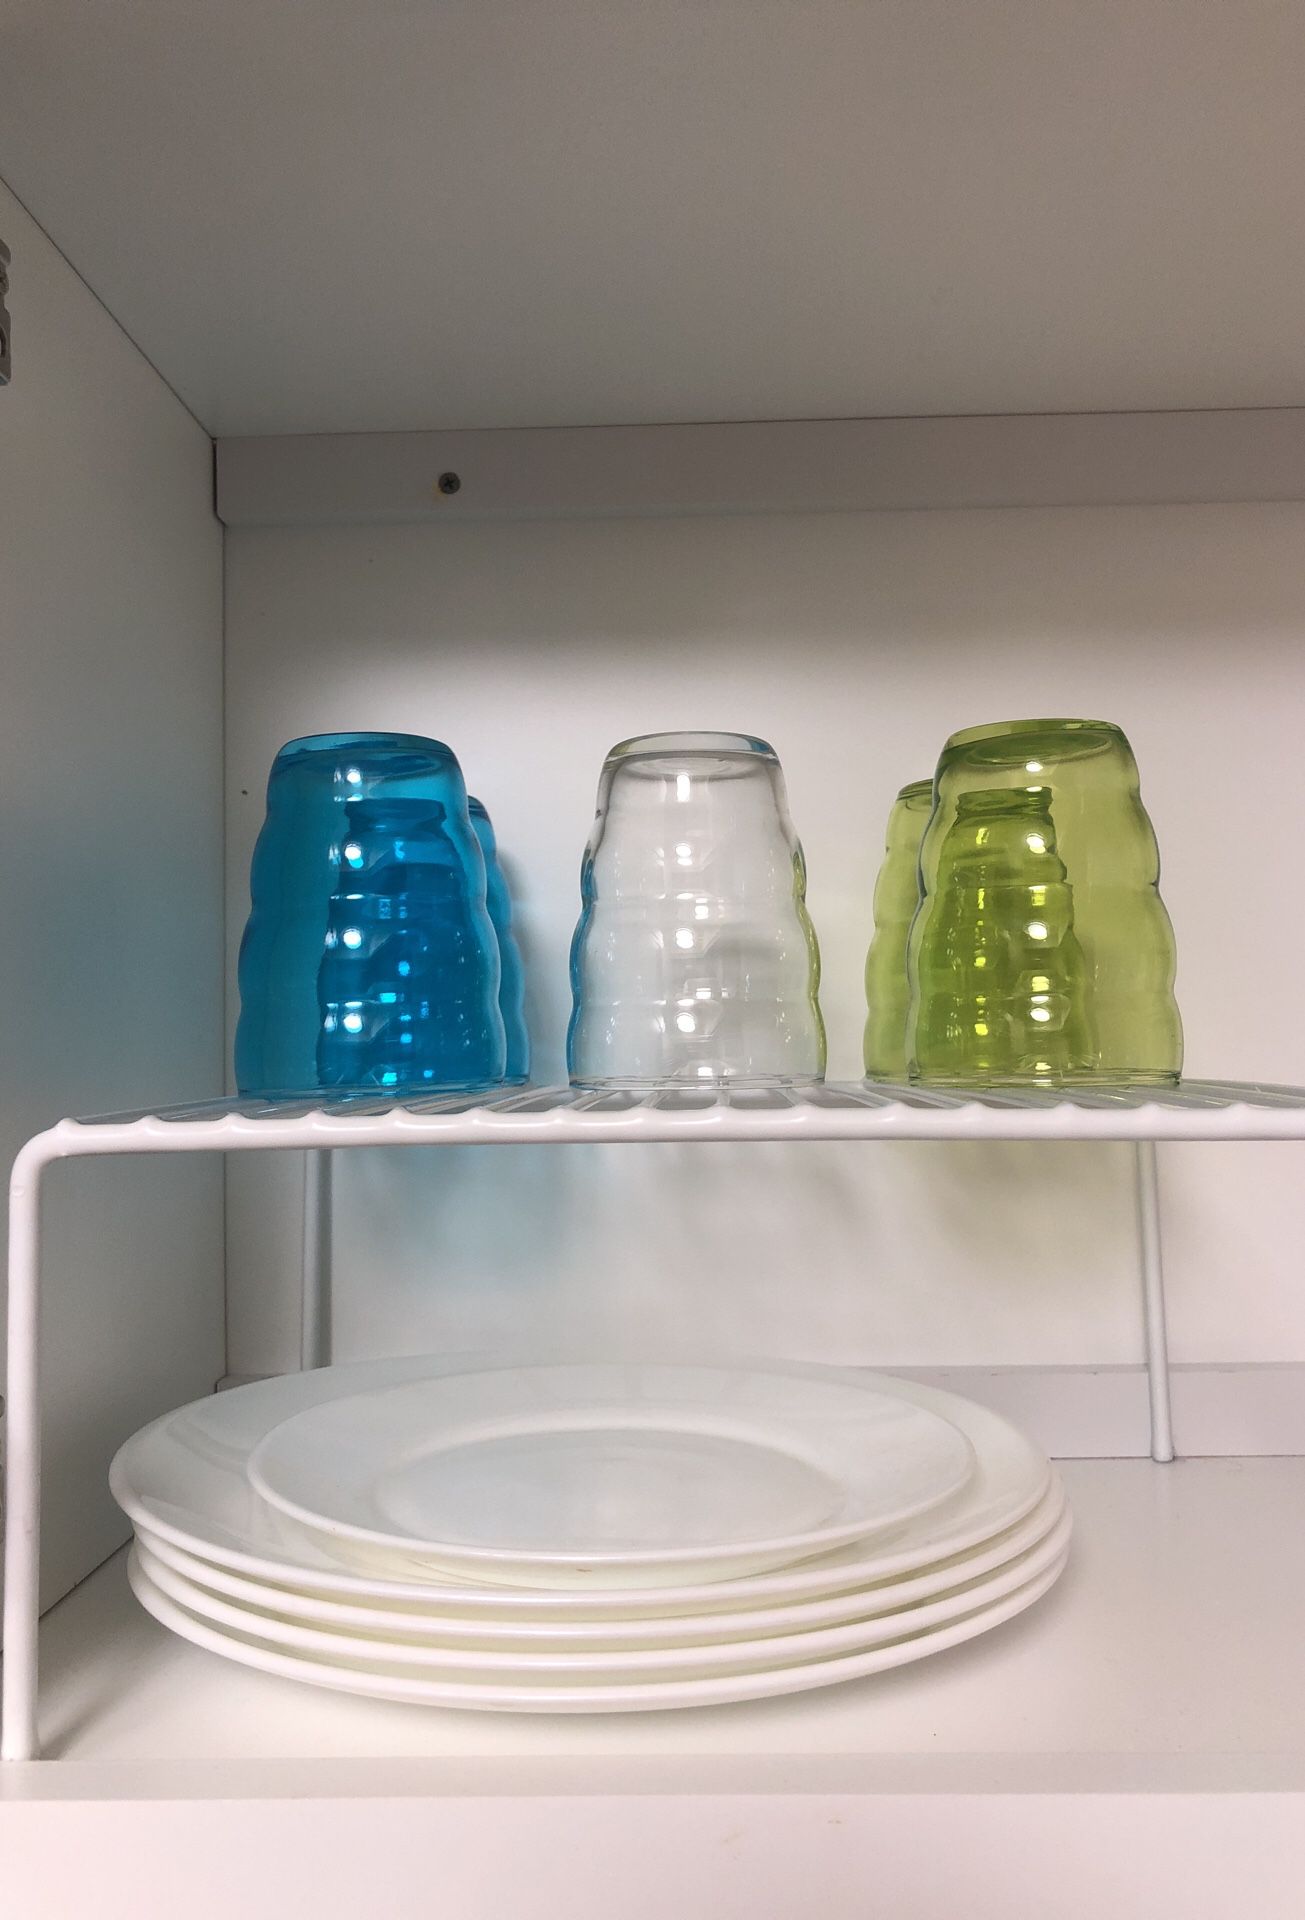 assorted glass and porcelain kitchenware